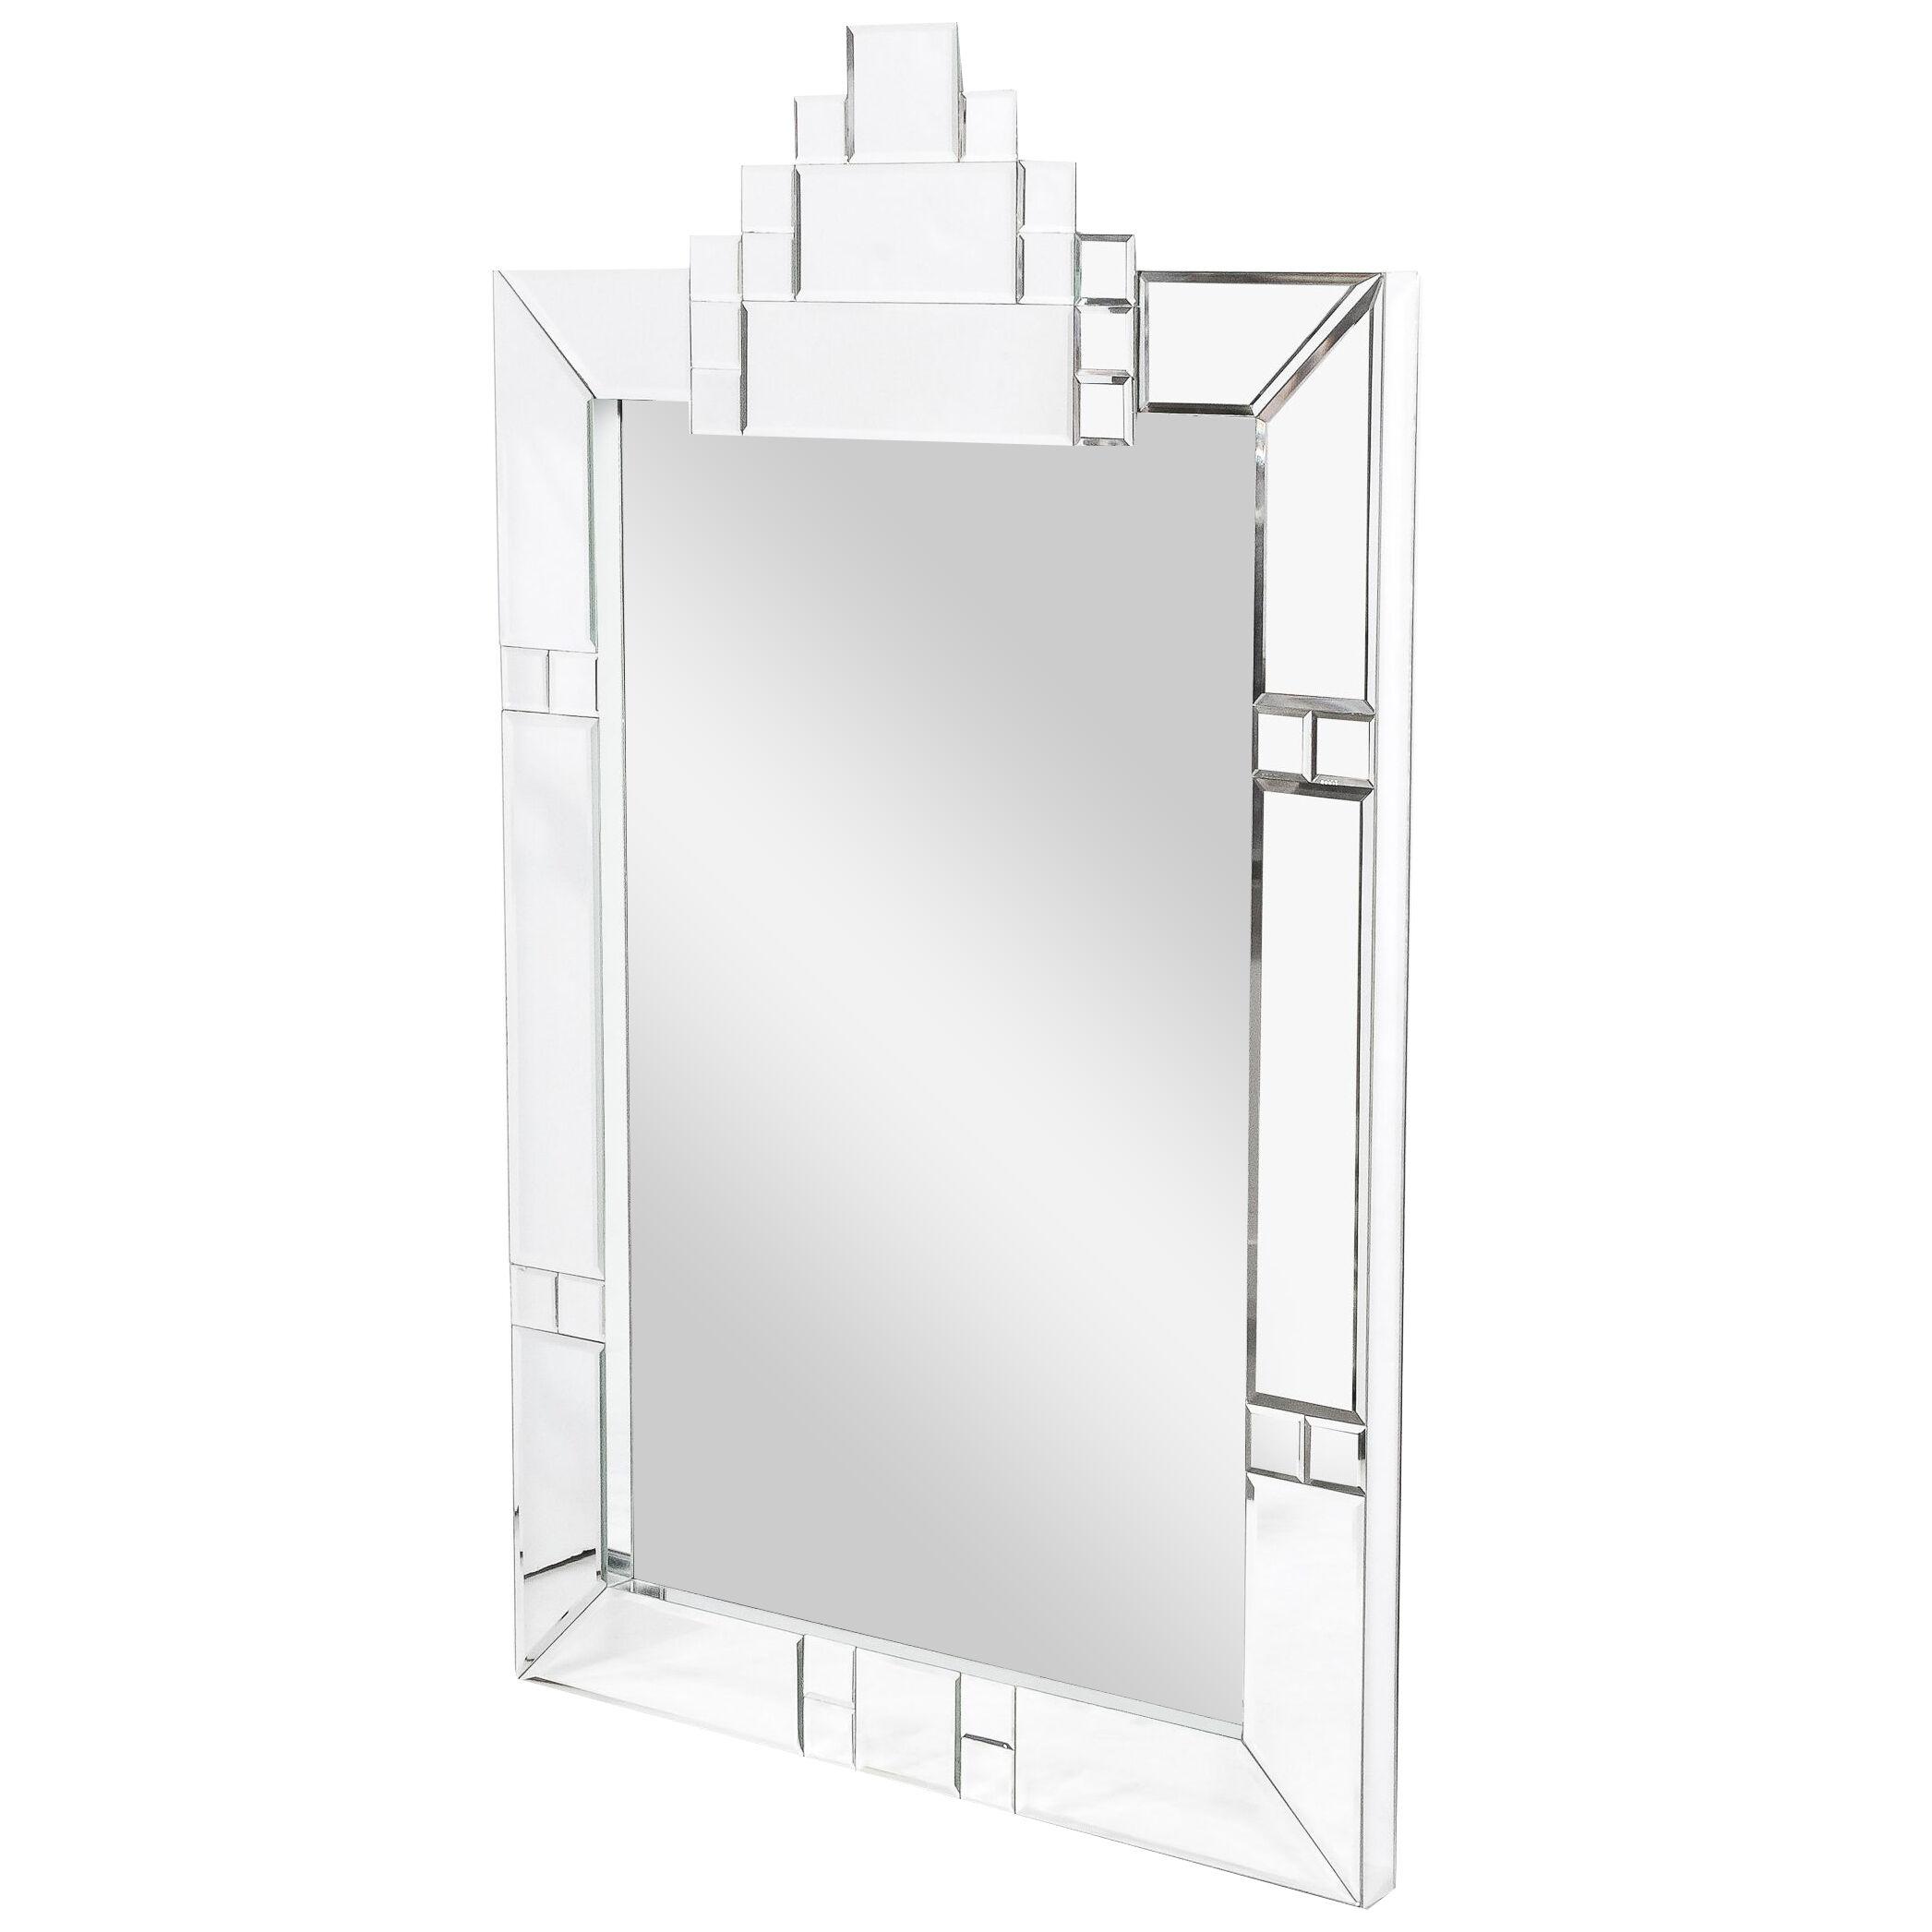 Modernist Tessellated Geometric Mirror with Stepped & Beveled Detailing